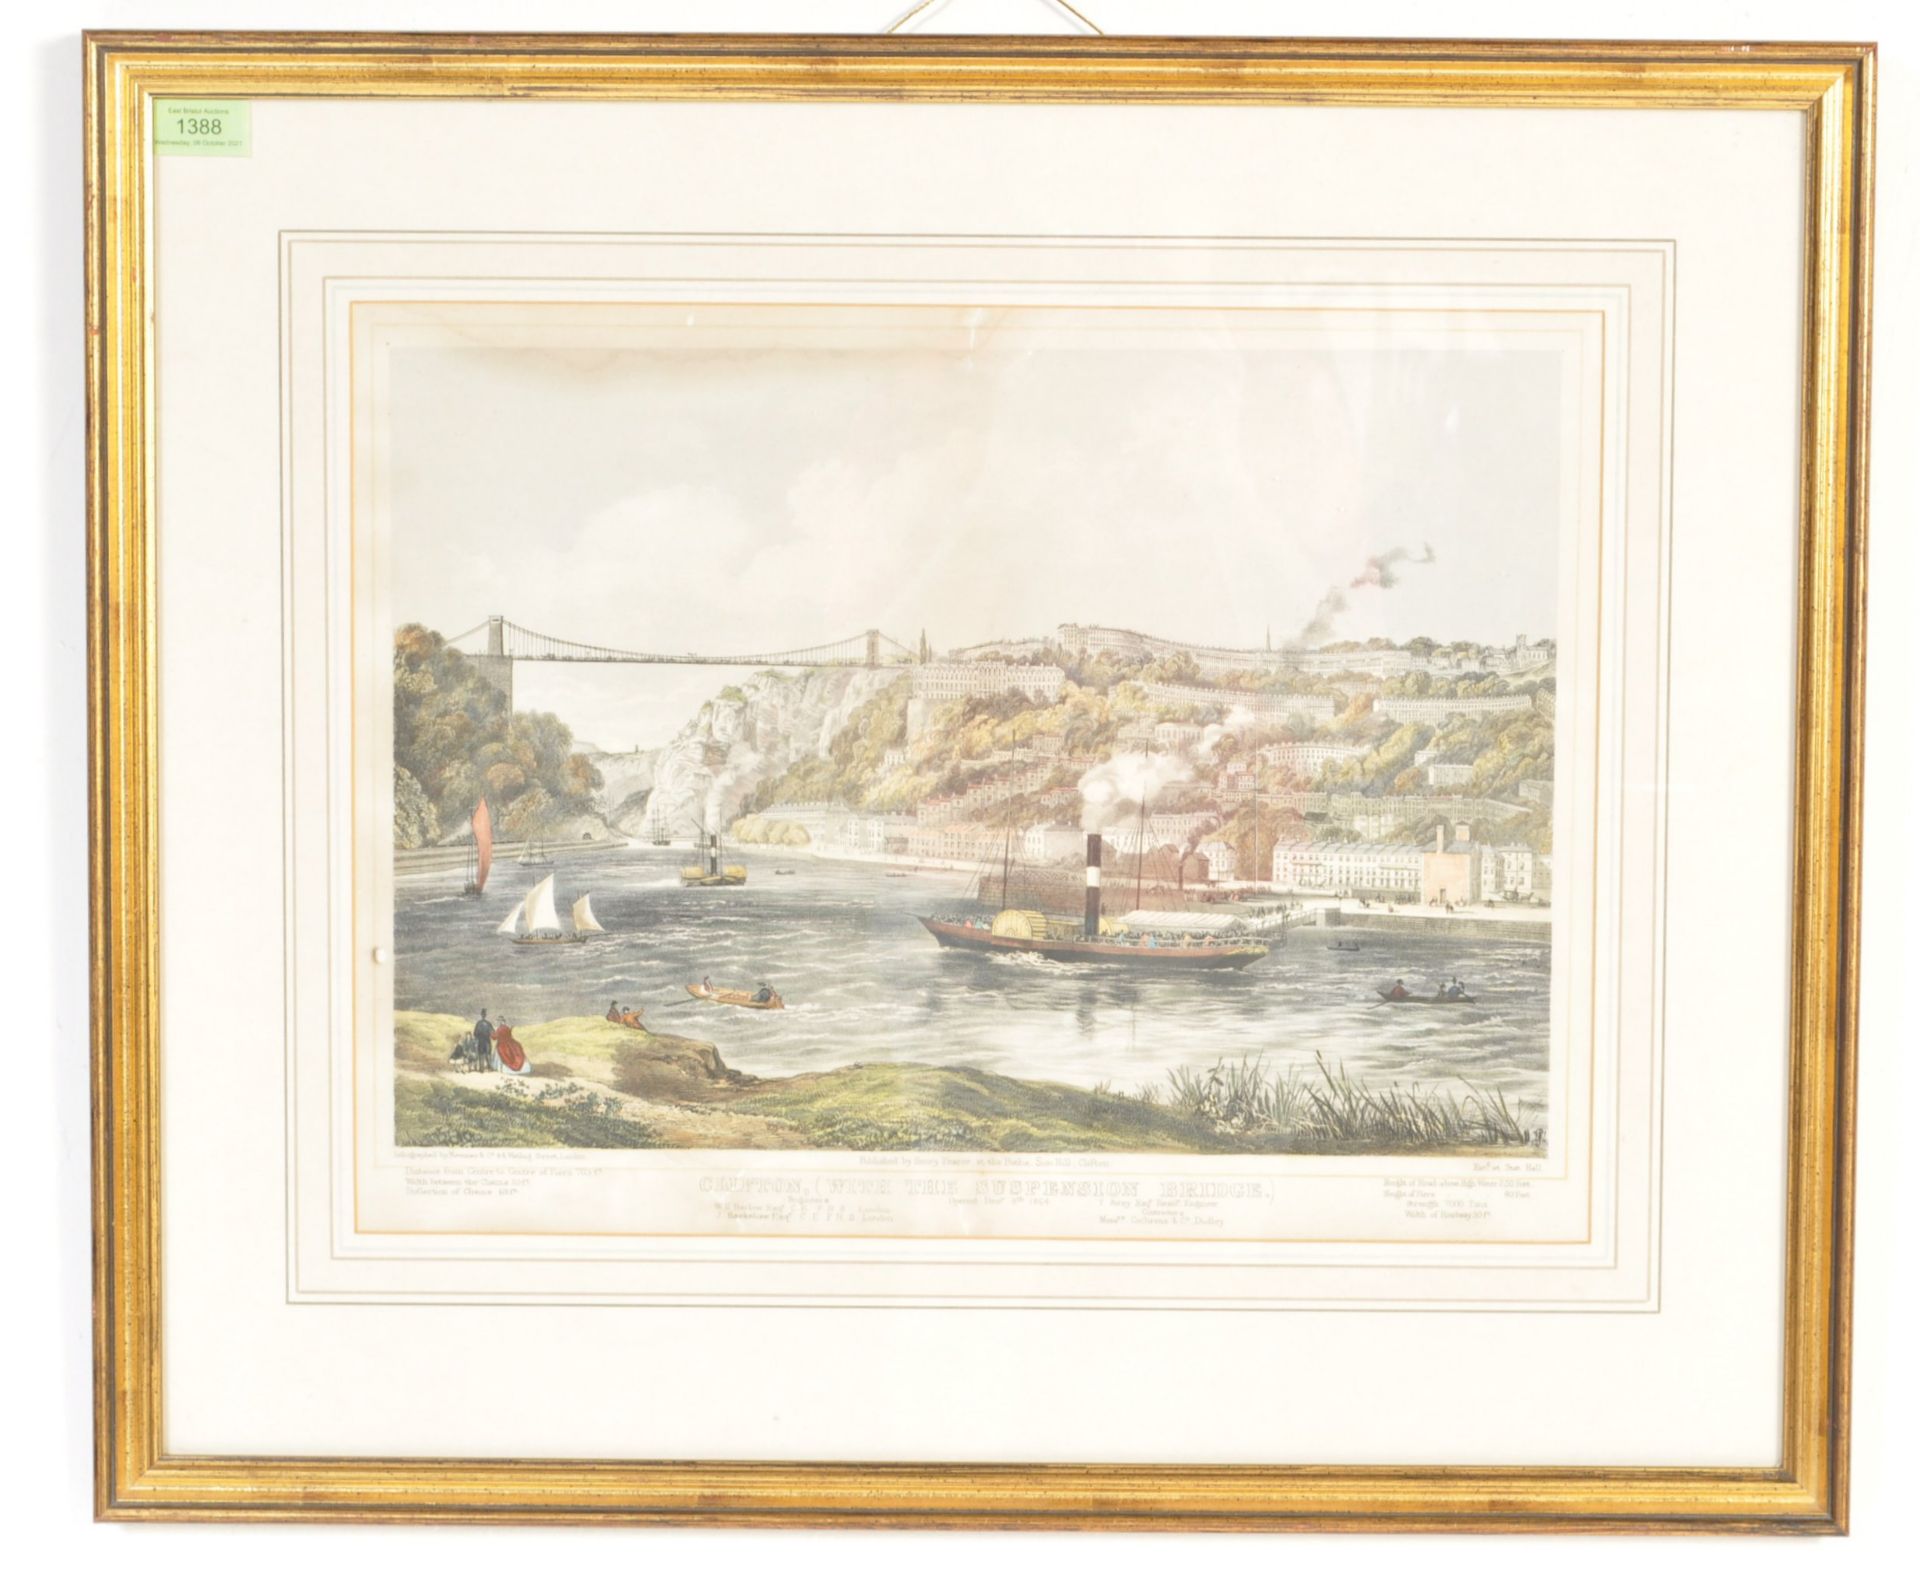 AFTER HENRY PEARCE - 19TH CENTURY VICTORIAN COLOUR LITHOGRAPH OF CLIFTON